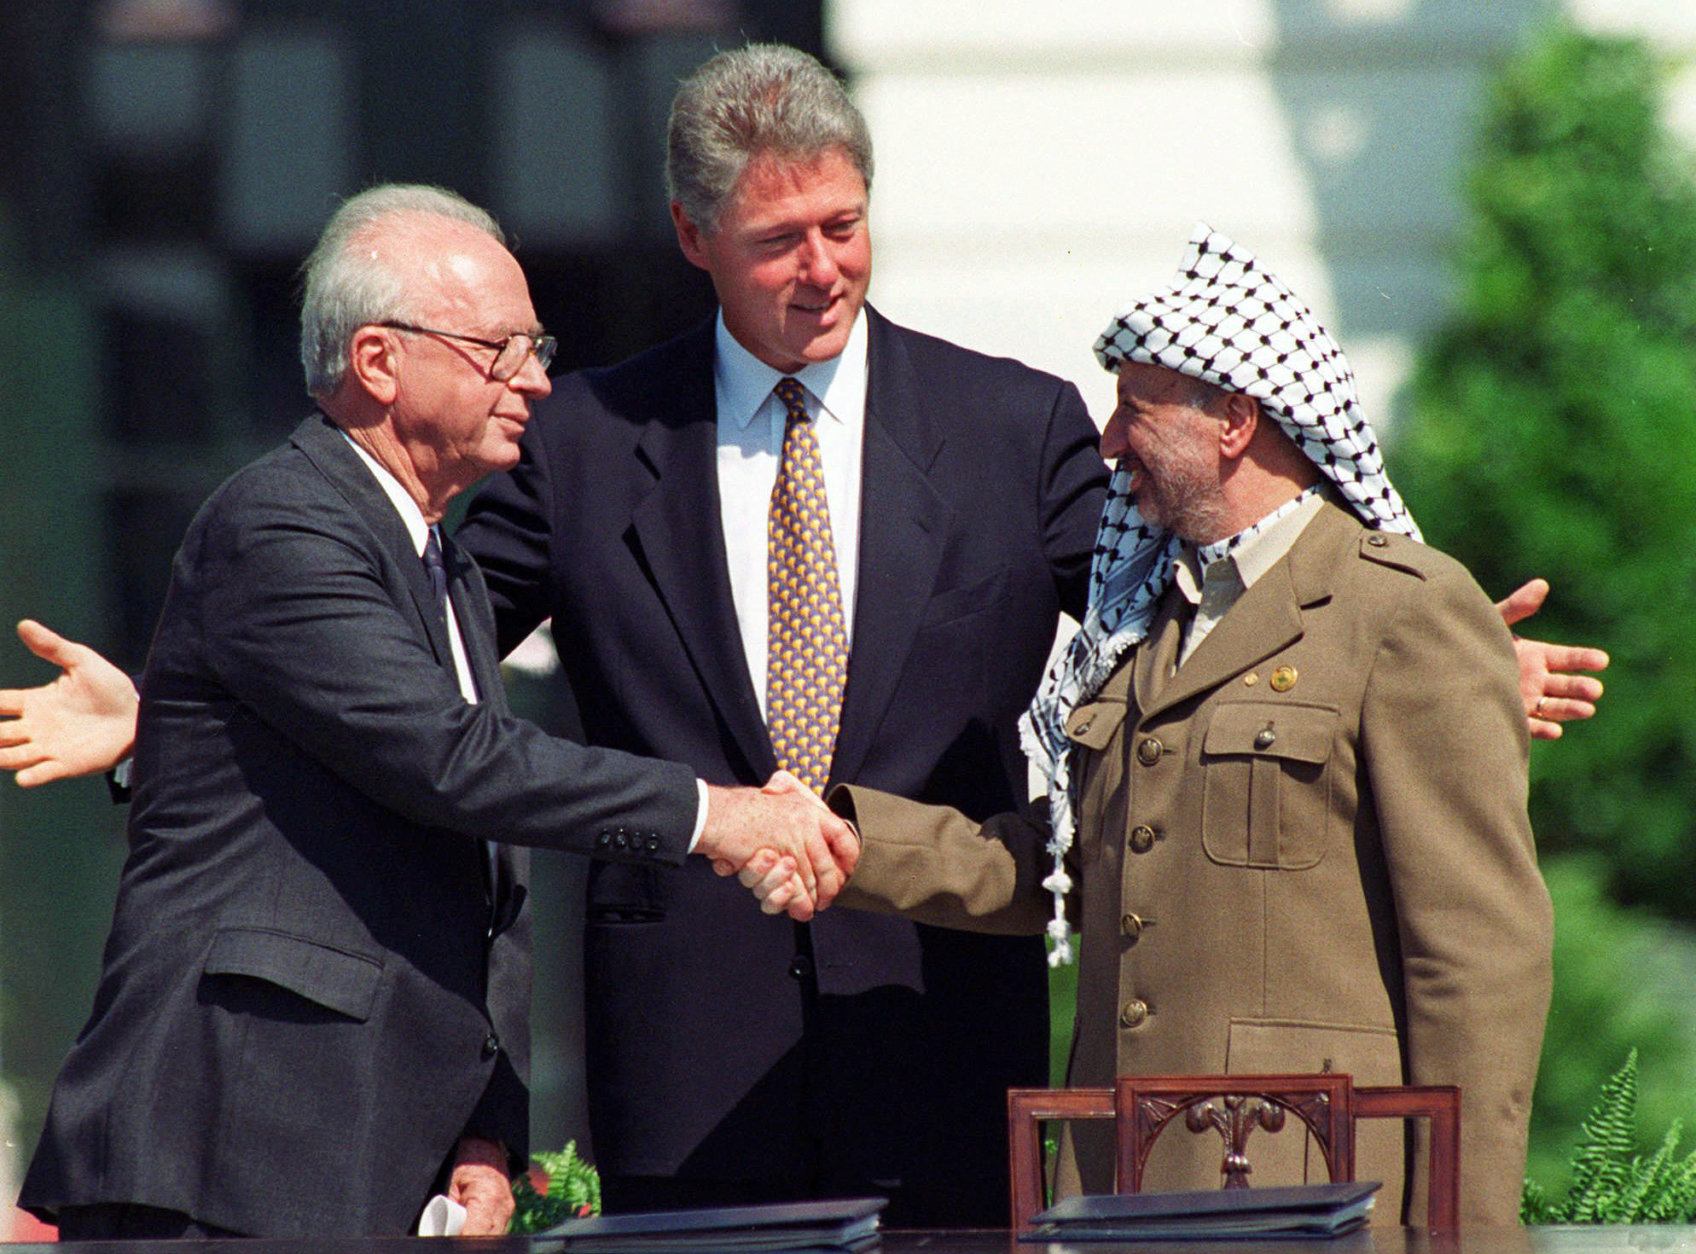 FILE -  In this Sept. 13, 1993 file photo President Clinton presides over White House ceremonies marking the signing of the peace accord between Israel and the Palestinians with Israeli Prime Minister Yitzhak Rabin, left, and Palestinian leader Yasser Arafat, right, in Washington.  In 1978, While President Jimmy Carter, Egypt’s Anwar Sadat and Israel’s Menachem Begin cemented the Camp David peace accord with a three-way handshake at the White House before the world’s cameras, the Palestinians were markedly absent. They hadn’t been included and references to the West Bank and Gaza did nothing to mollify anger among the stateless seeking a state.  (AP Photo/Ron Edmonds, File)